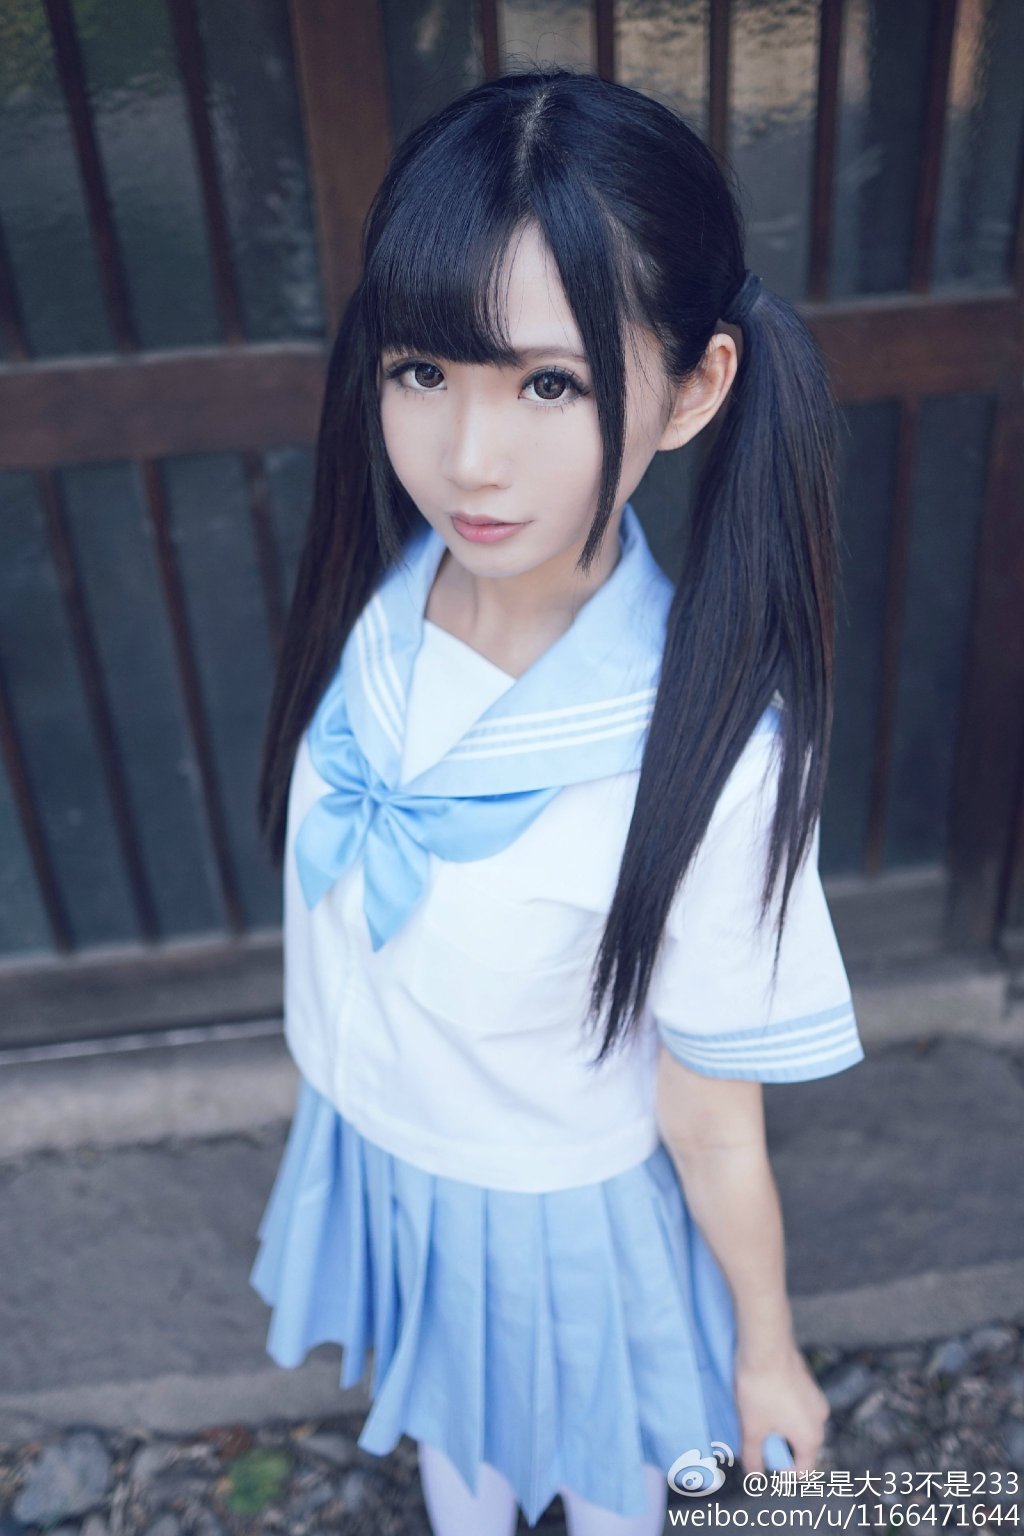 17 Adorable Japanese School Uniforms To Fall In